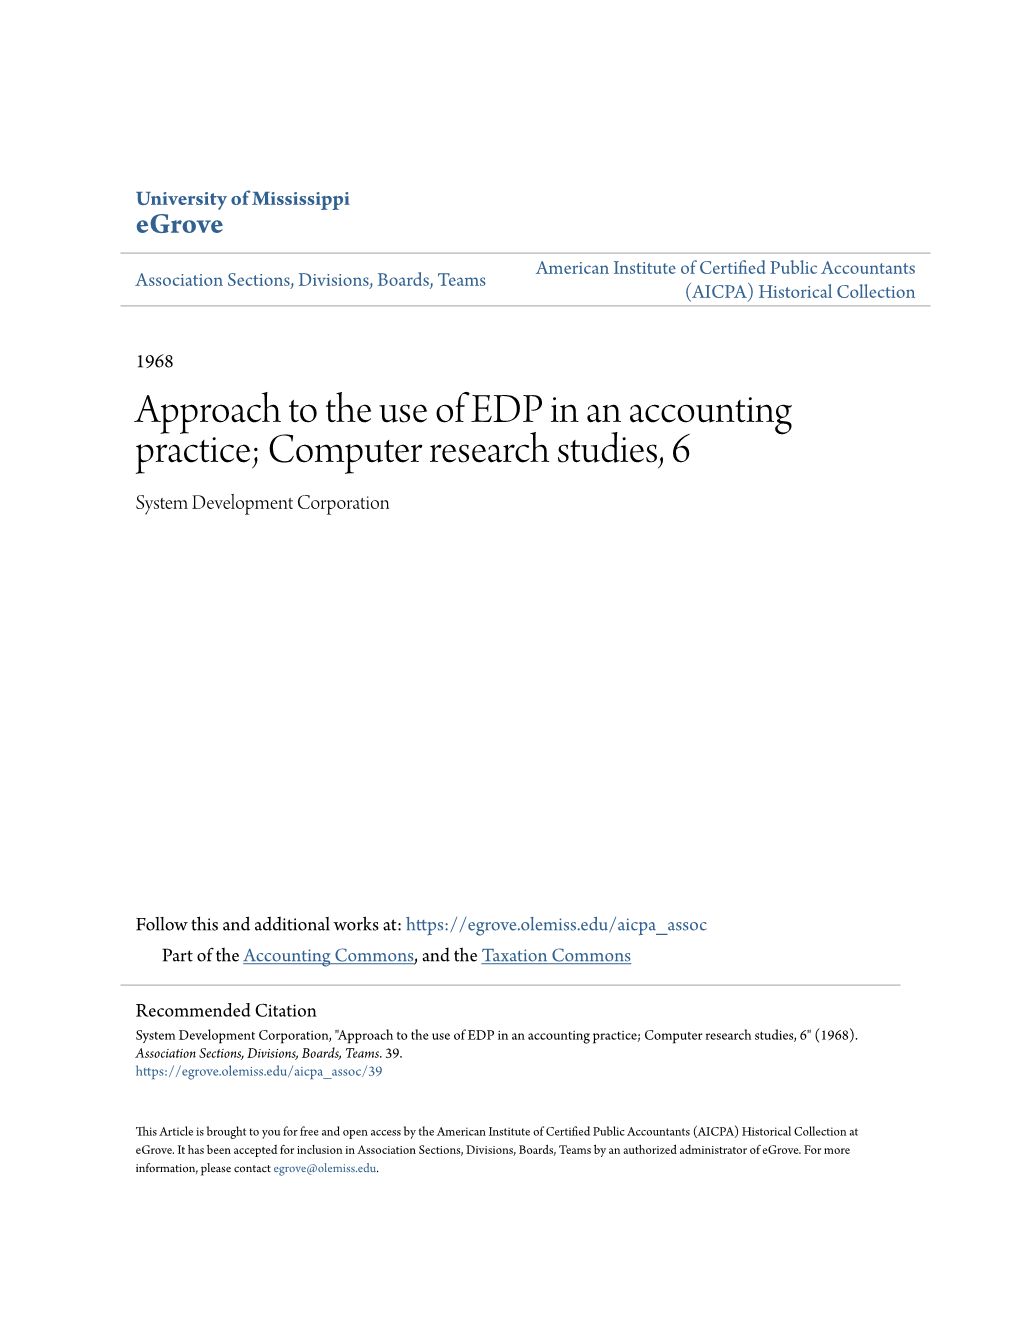 Approach to the Use of EDP in an Accounting Practice; Computer Research Studies, 6 System Development Corporation